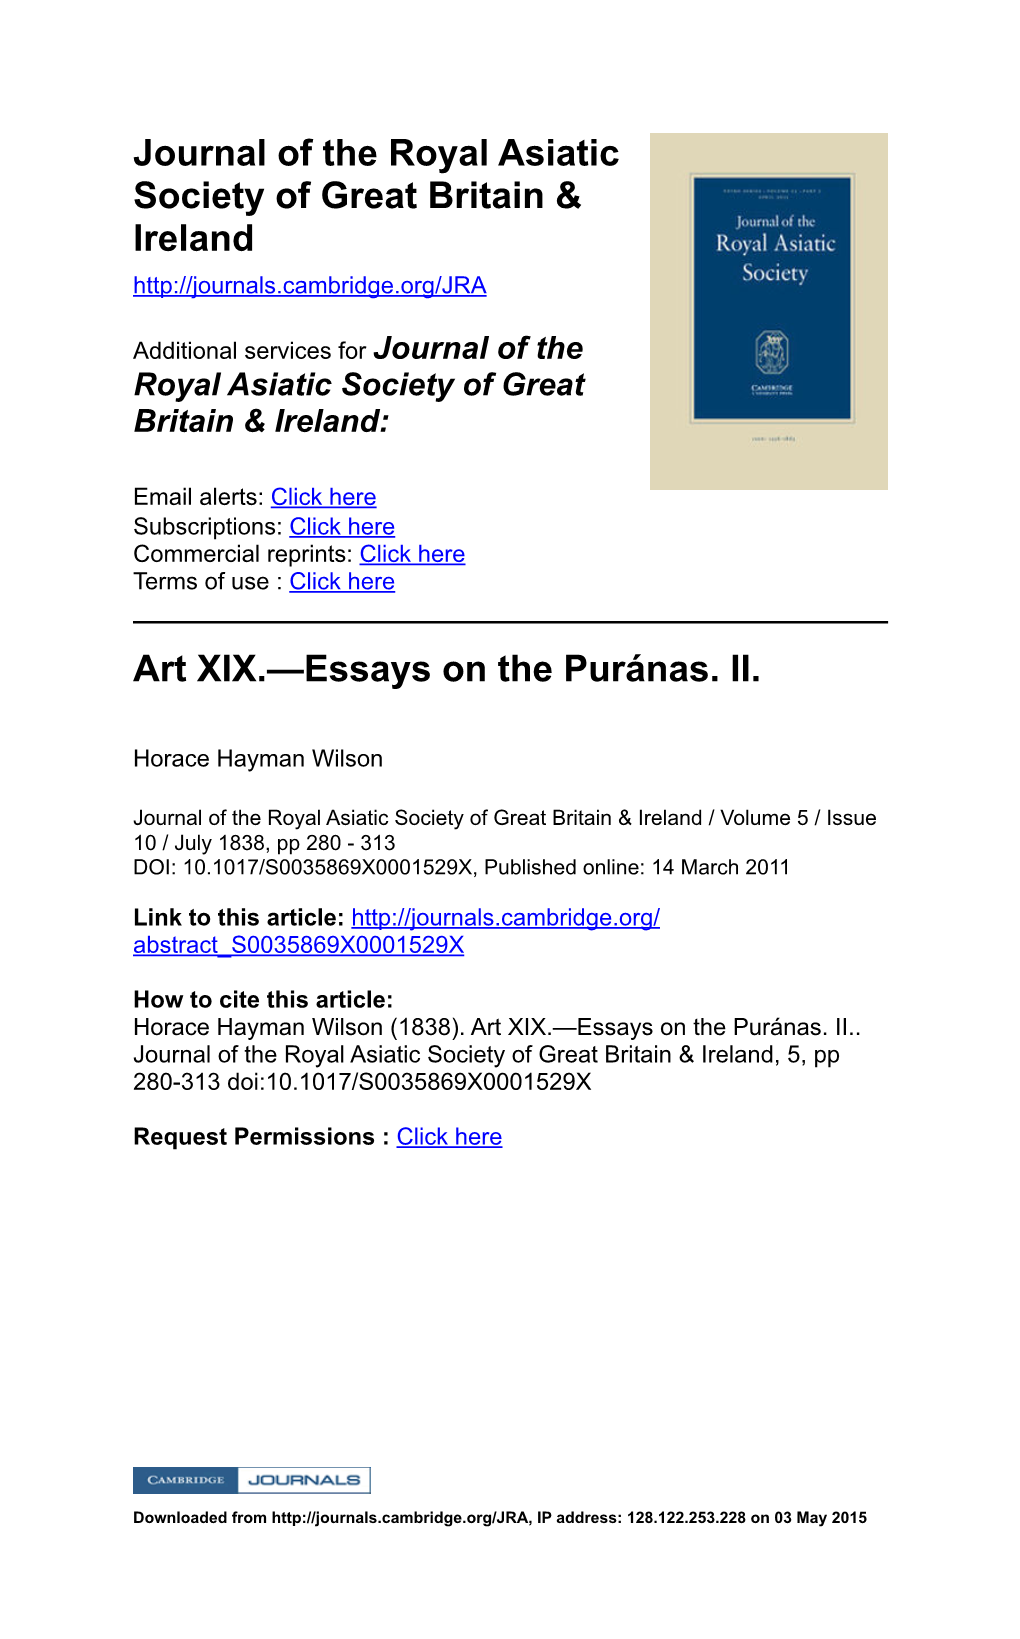 Journal of the Royal Asiatic Society of Great Britain & Ireland Art XIX